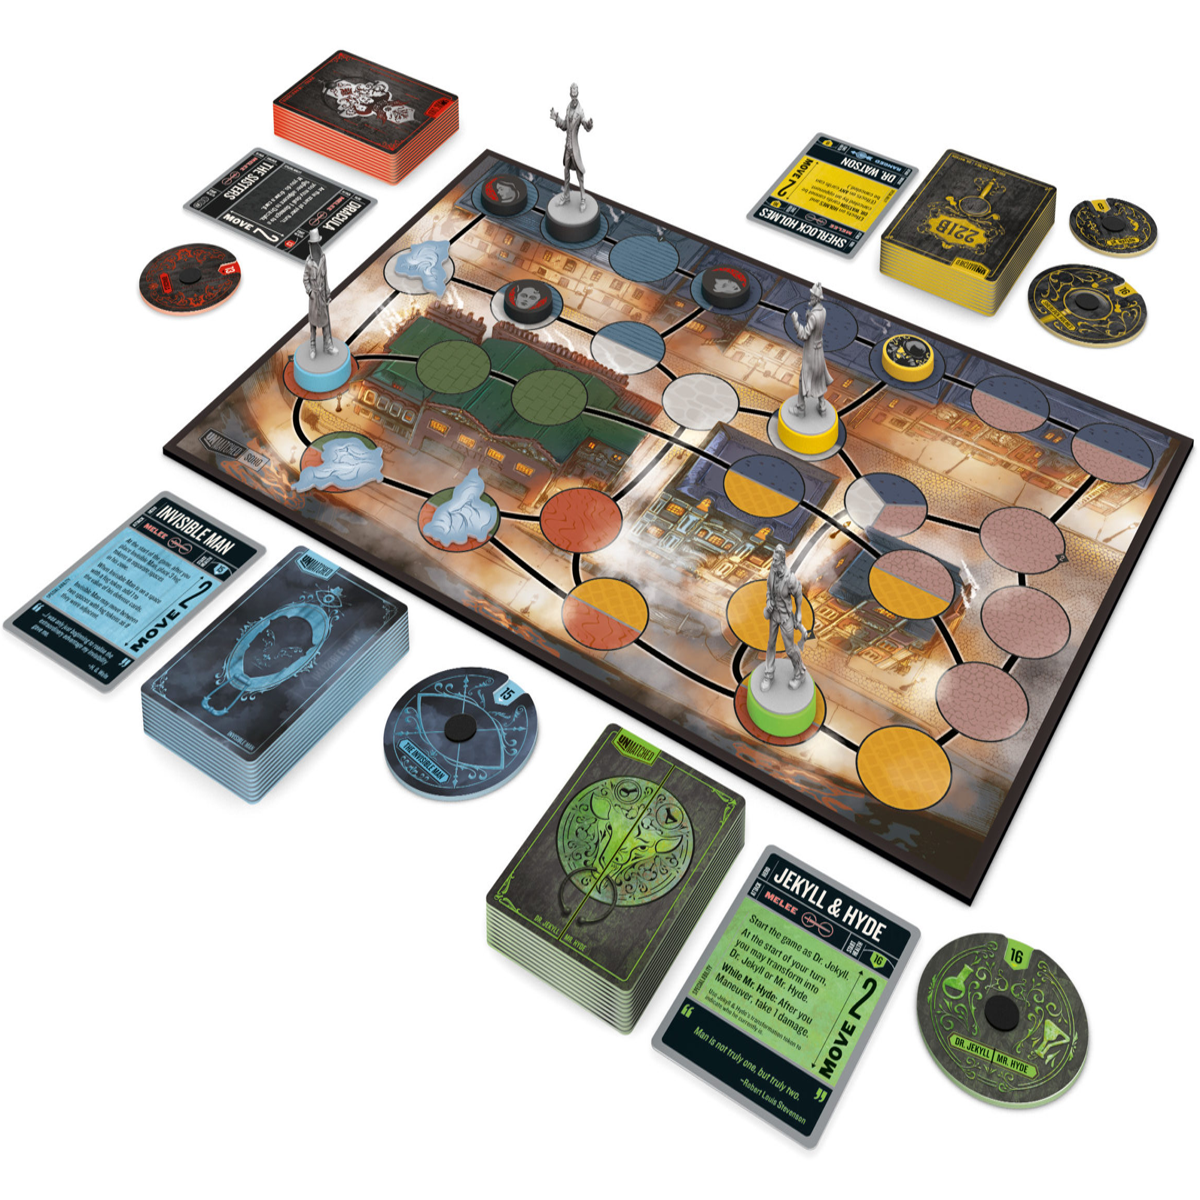 https://assetsio.reedpopcdn.com/unmatched-cobble-and-fog-board-game-gameplay-layout.png?width=1200&height=1200&fit=crop&quality=100&format=png&enable=upscale&auto=webp